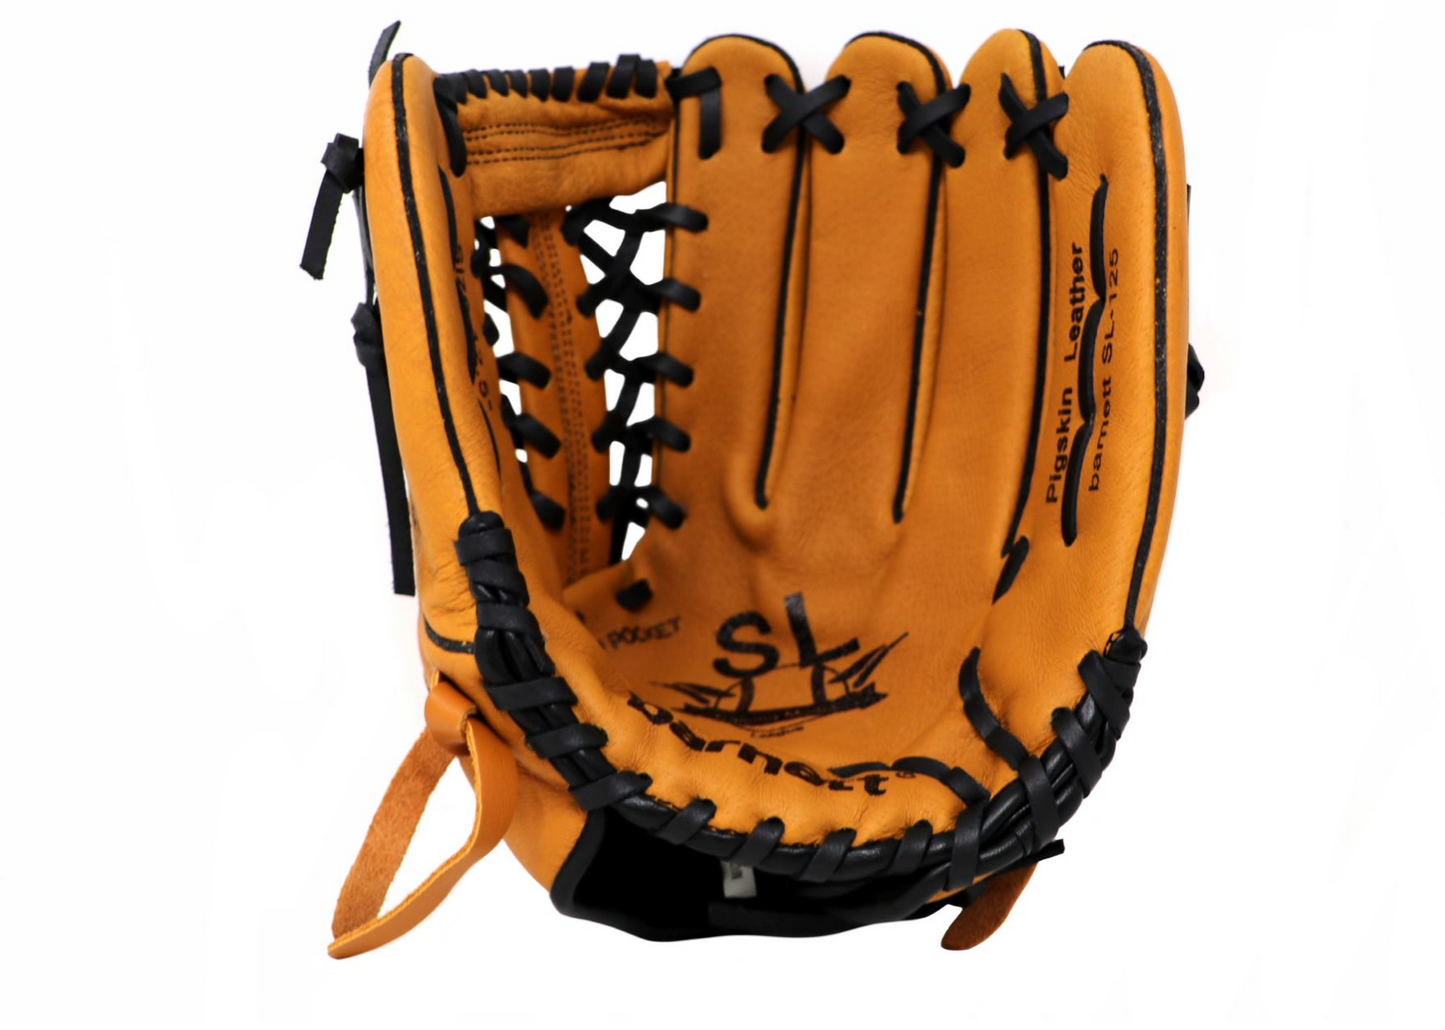 SL-125 Baseball gloves in leather outfield, size 12.5, Brown